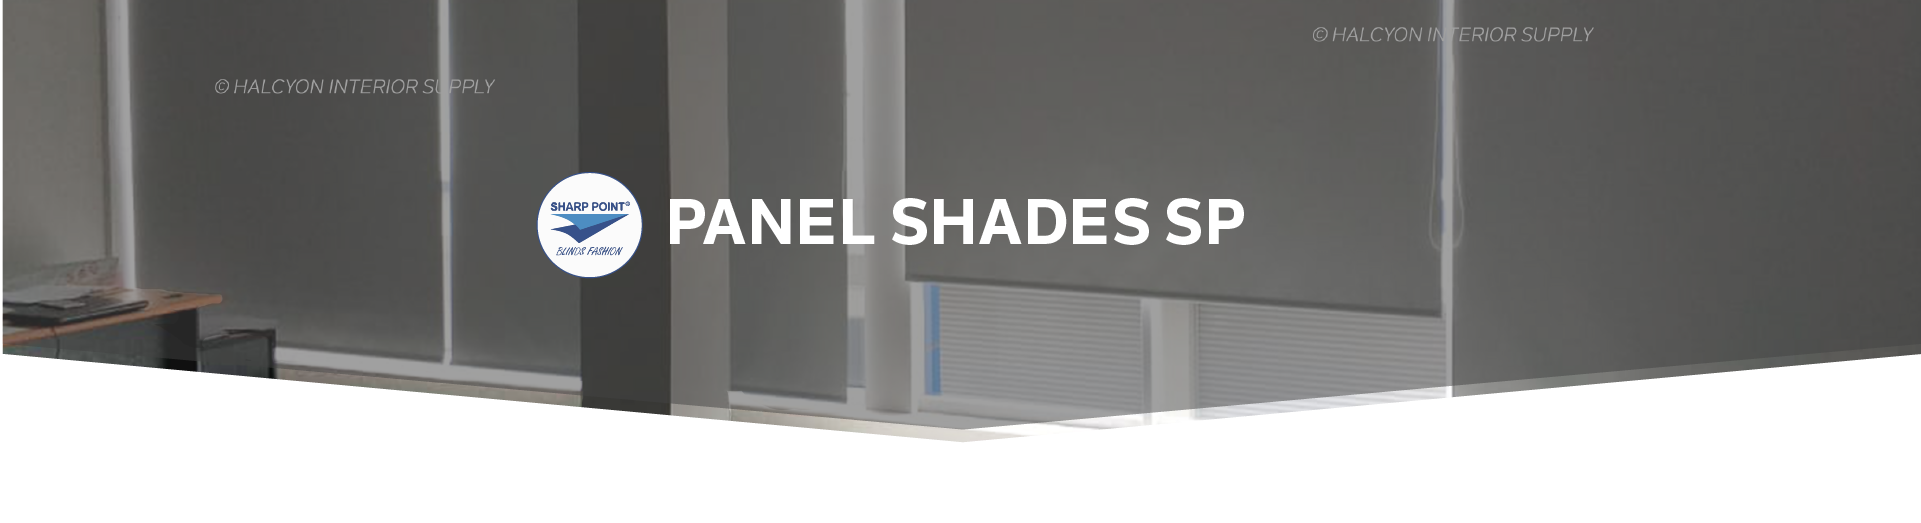 PANEL SHADES Cover by Halcyon Interior